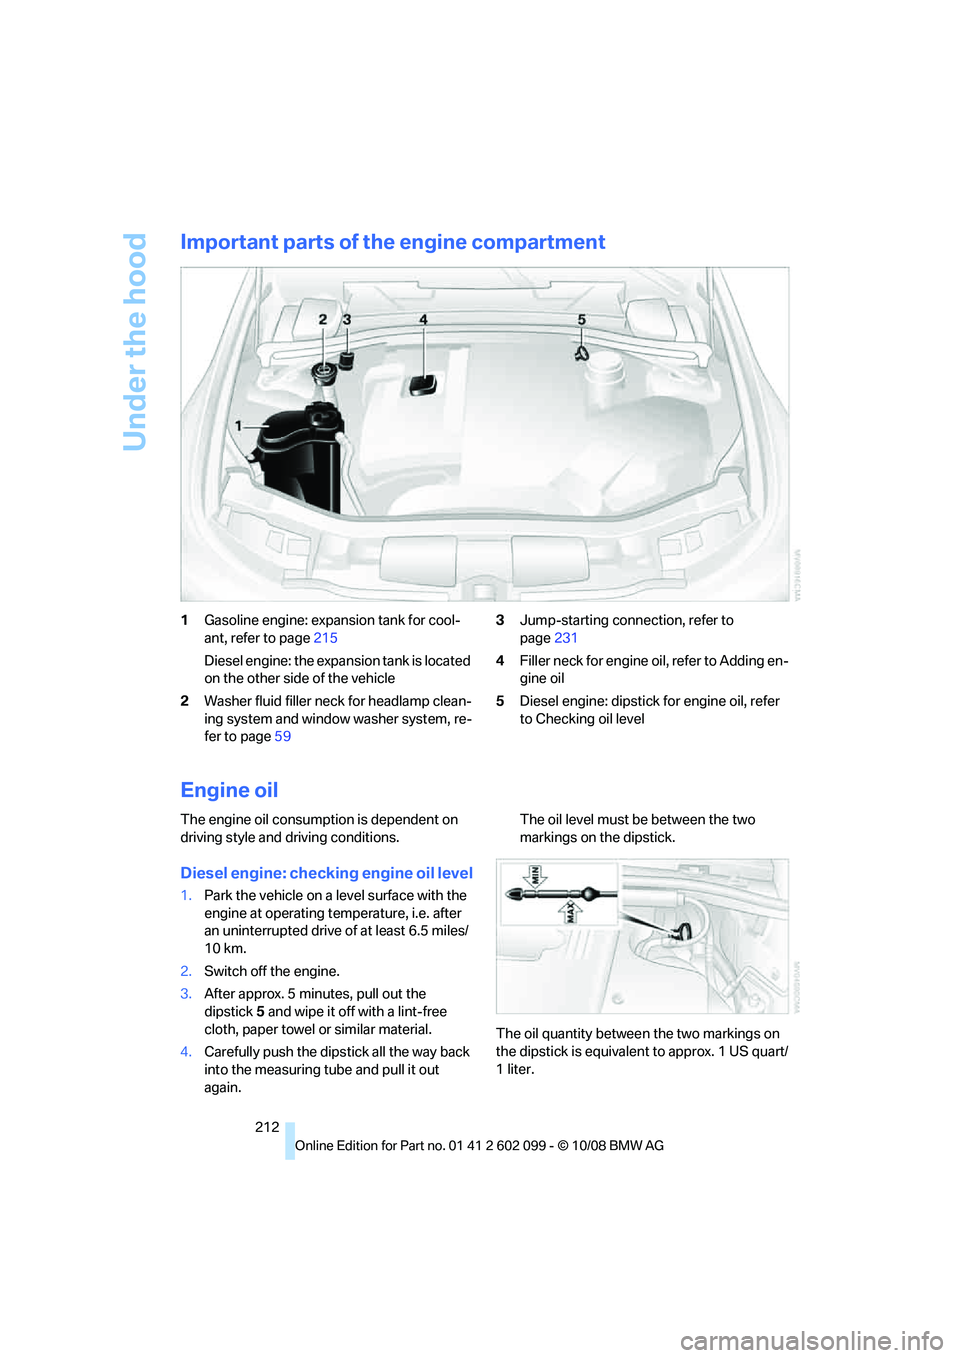 BMW 328I 2009  Owners Manual Under the hood
212
Important parts of the engine compartment
1Gasoline engine: expansion tank for cool-
ant, refer to page 215
Diesel engine: the expansion tank is located 
on the other side of the ve